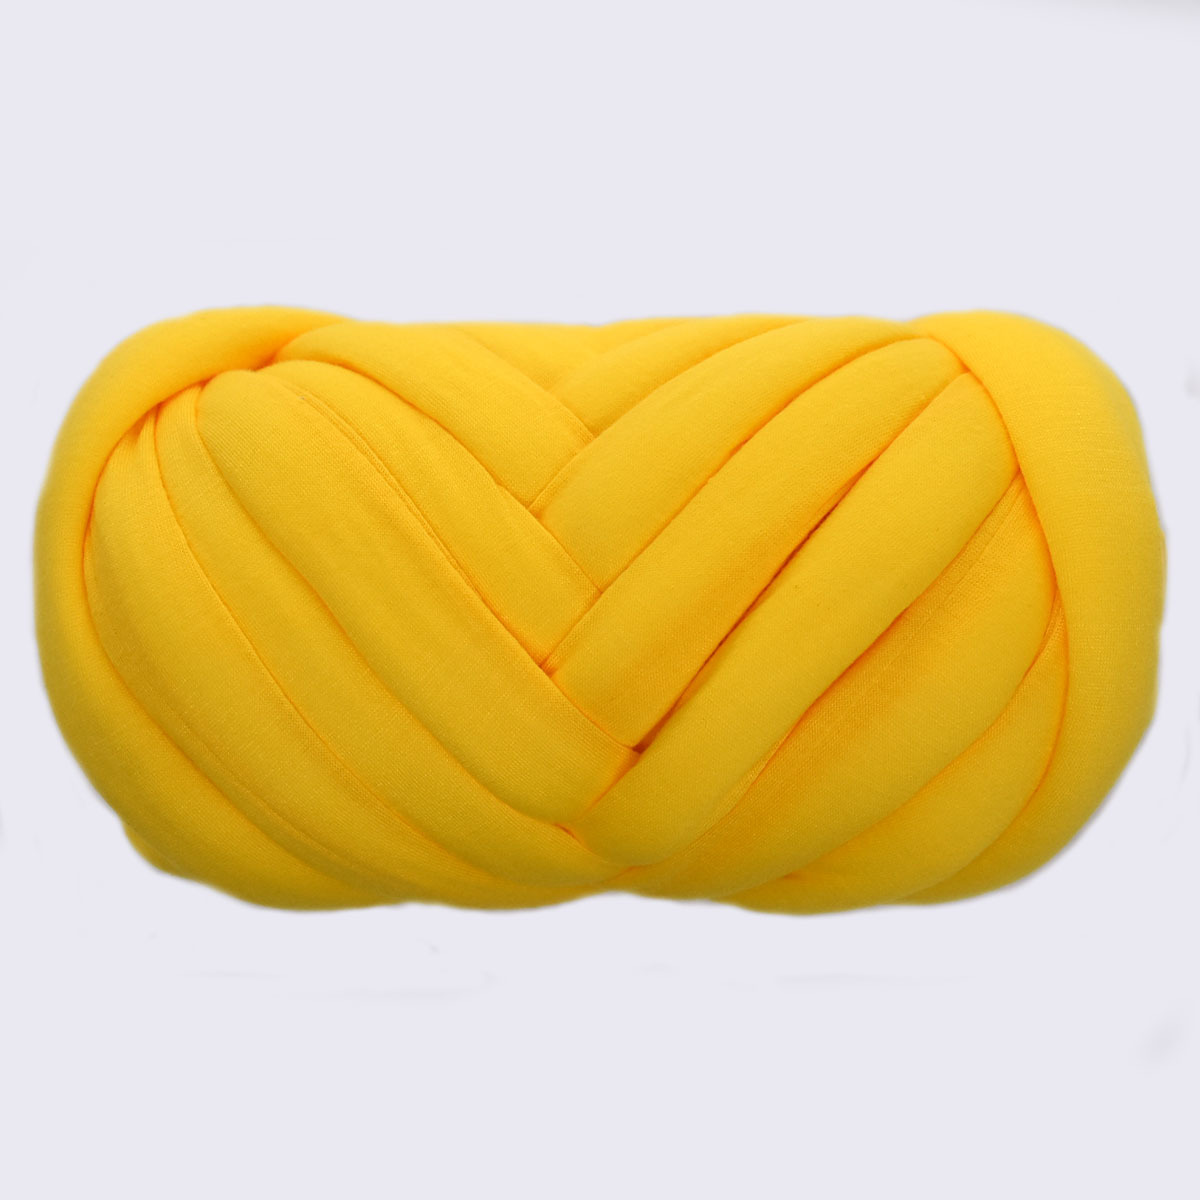 Super Thick Chunky Wool Yarn For Knitting, Crochet, Carpet, Hats Super  Bulky Arm Roving And Chunky Knit Throw Blanket Making 197T From Tobiass,  $14.58